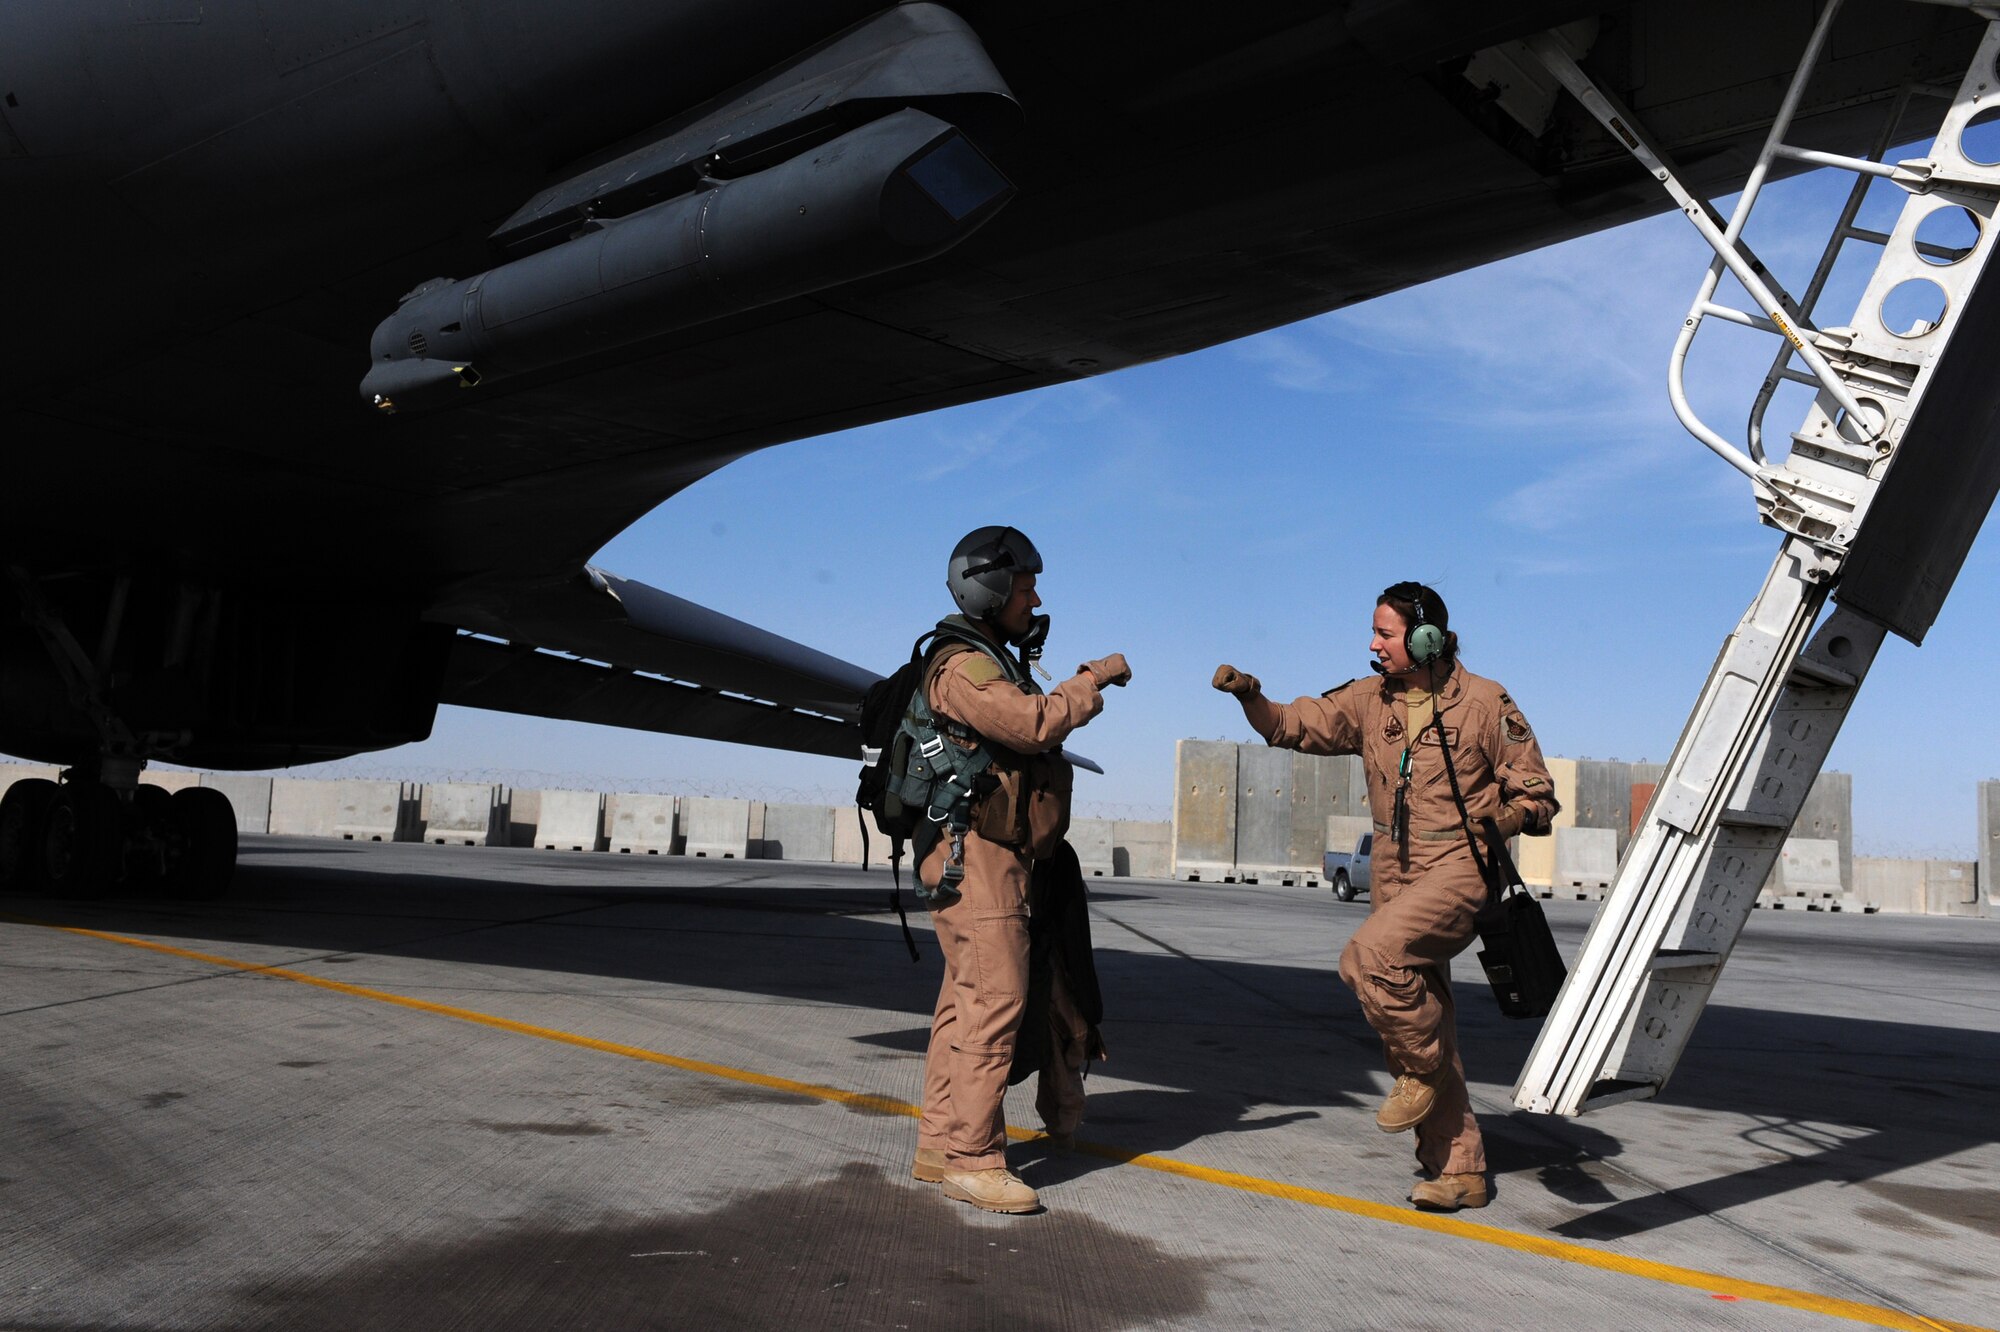 Lt. Col. John ''Oasis'' Martin, B-1B Lancer pilot, and Capt. Tara Hart, a B-1B weapon system officer, both assigned to the 37th Expeditionary Bomb Squadron, exchange a good-luck gesture before boarding a B-1B bomber Jan. 23, 2010, in Southwest Asia. Lt. Col. Martin and his flight crew are stationed at Ellsworth Air Force Base and this was the last mission of their six-month deployment.  (U.S. Air Force photo/Staff Sgt. Manuel J. Martinez/Released)